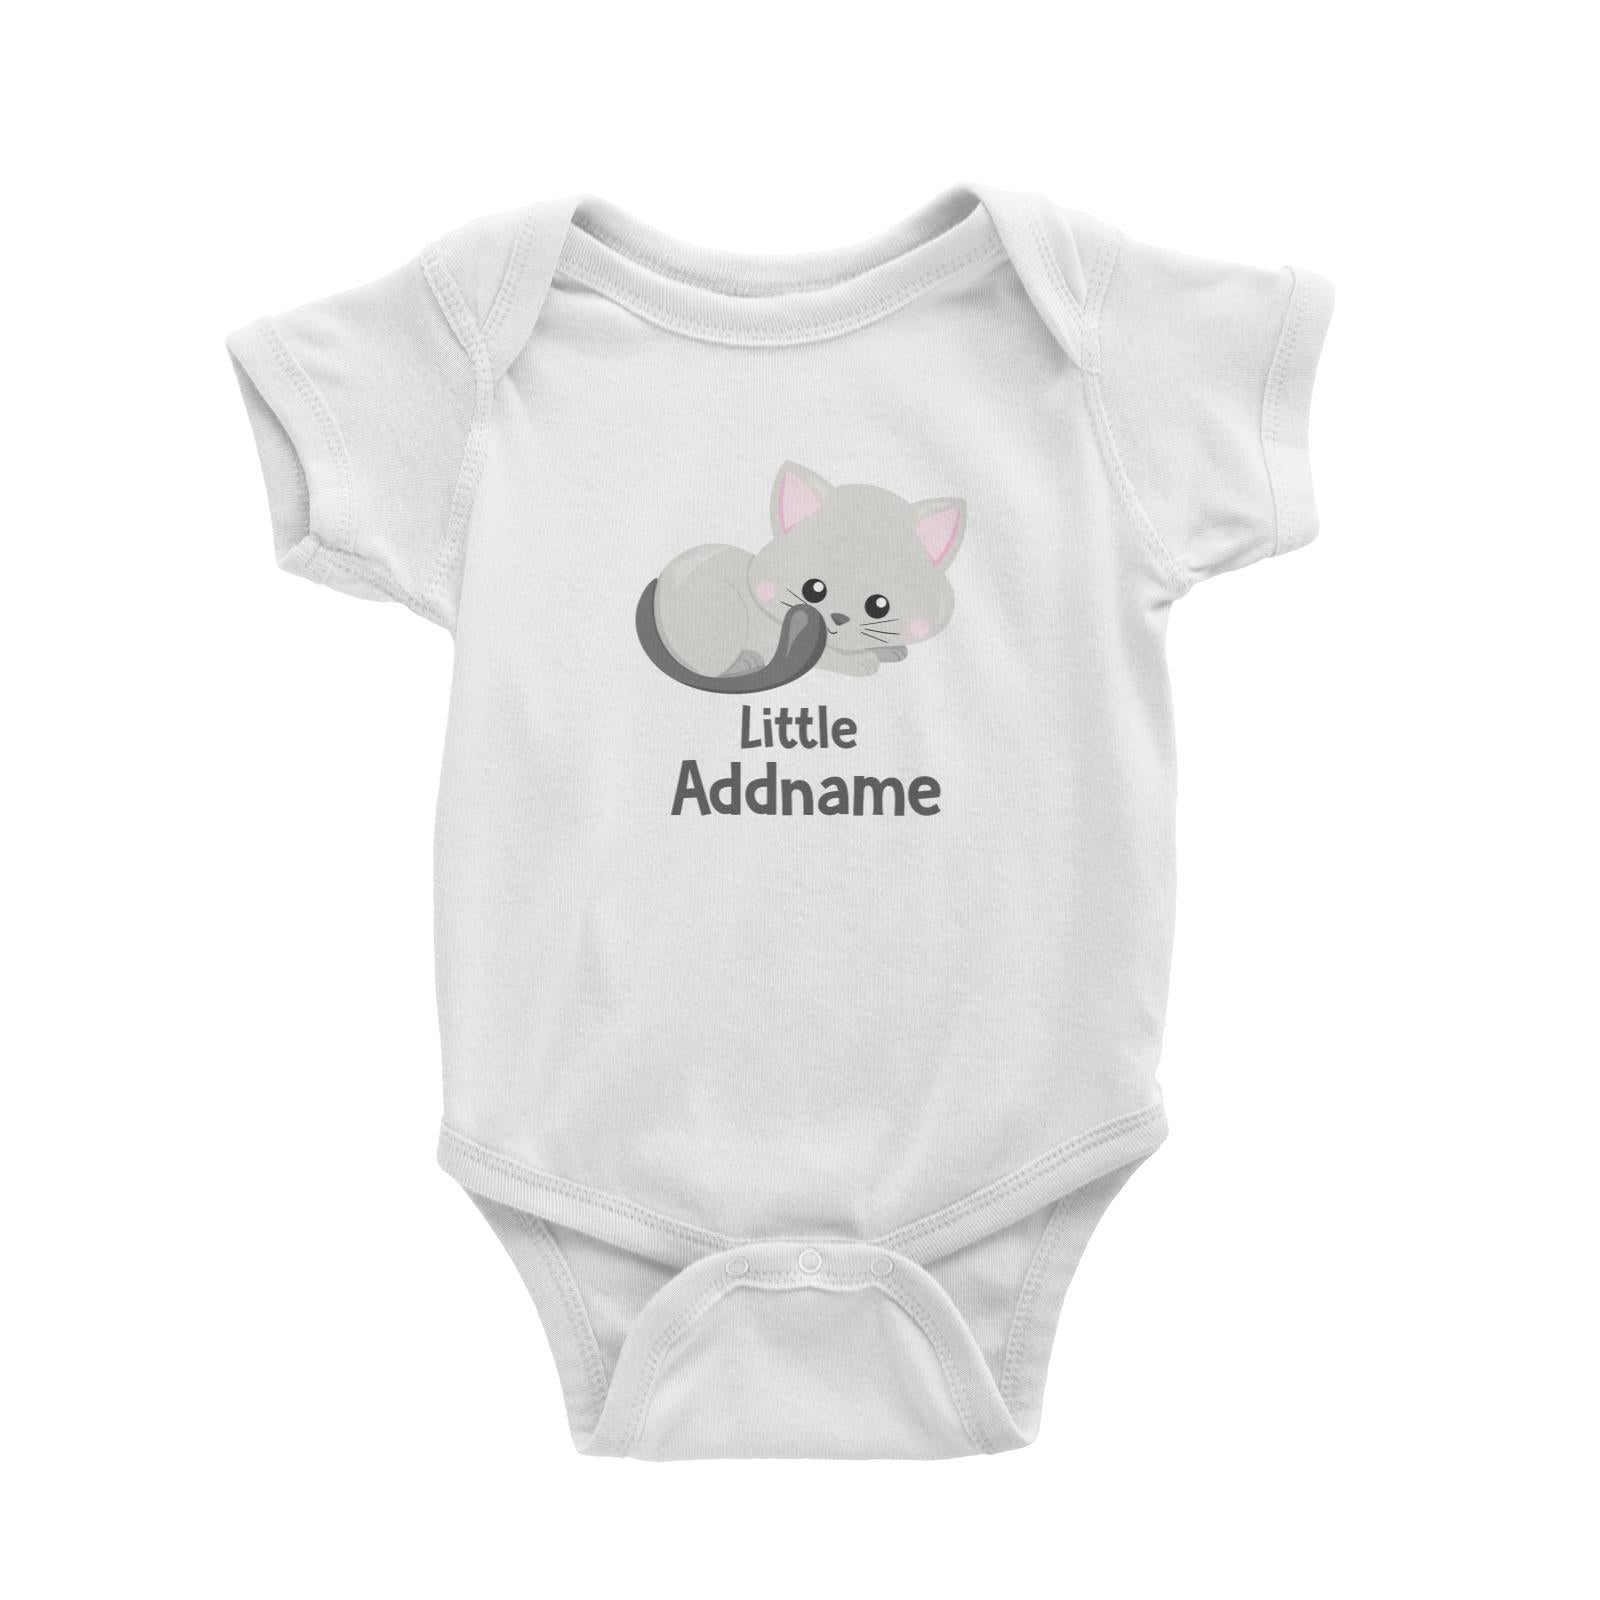 Adorable Cats Grey Cat Little Addname White Baby Romper